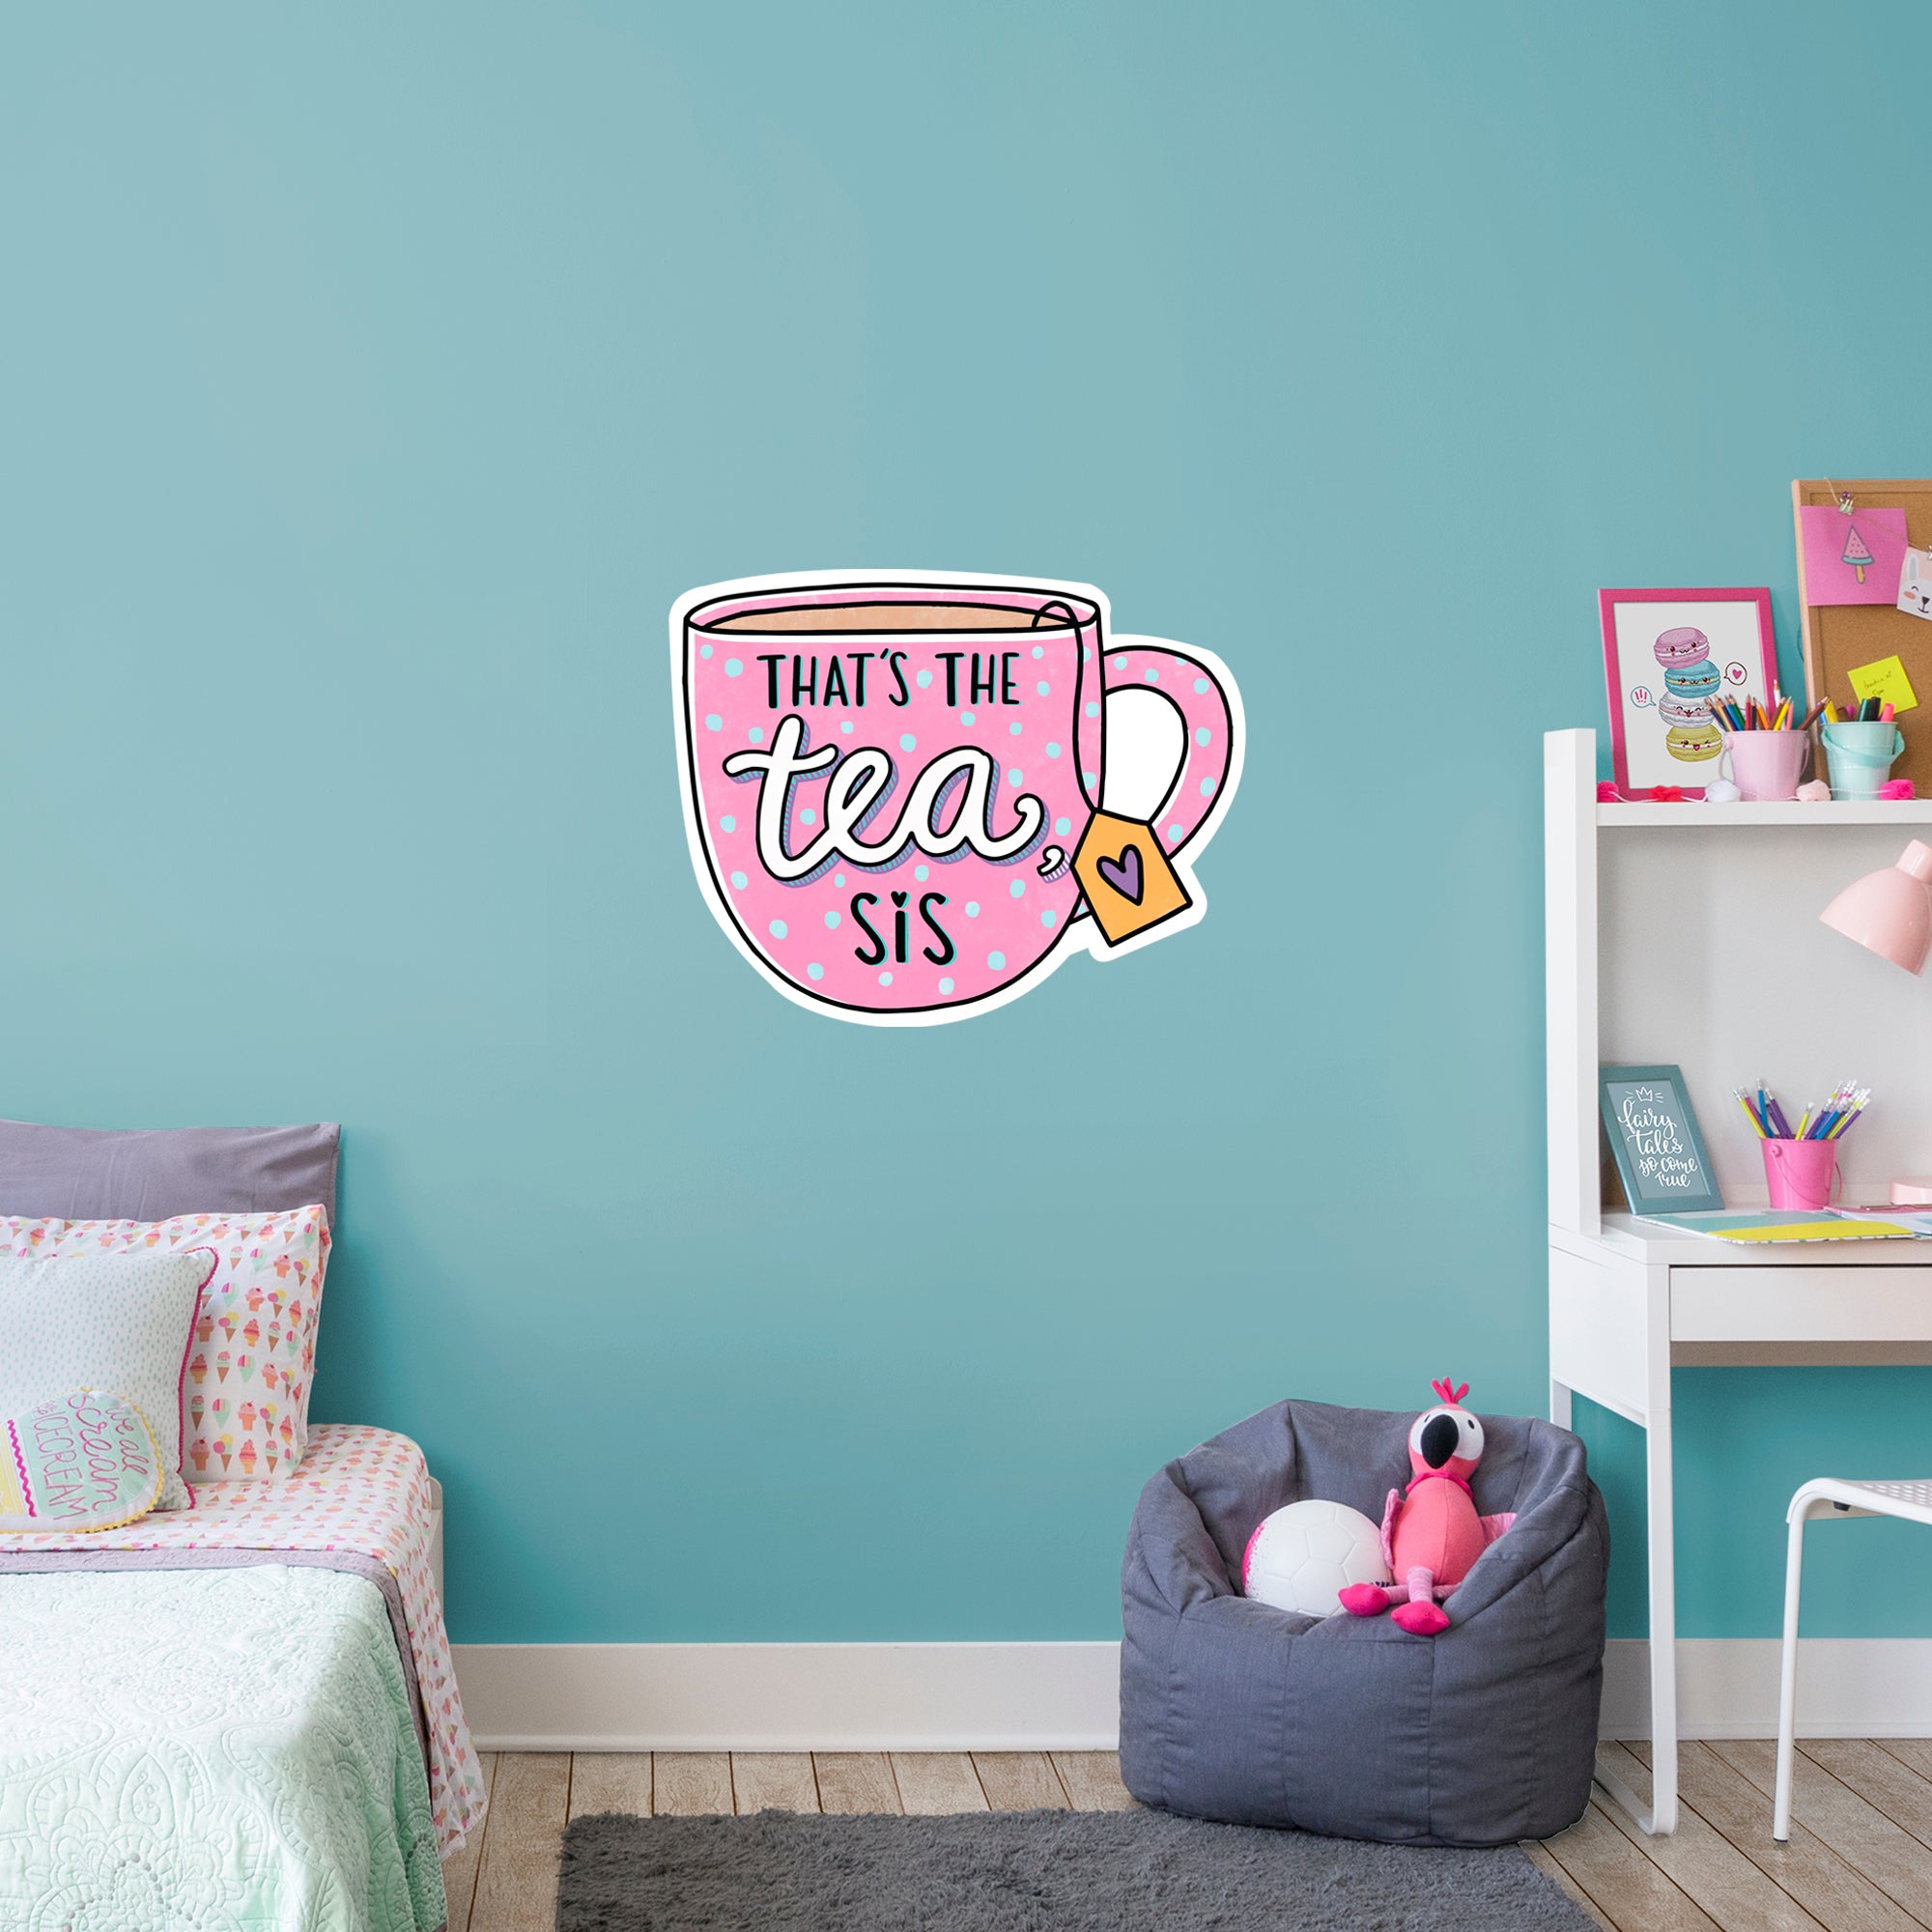 Thats The Tea Sis - Officially Licensed Big Moods Removable Wall Decal XL by Fathead | Vinyl